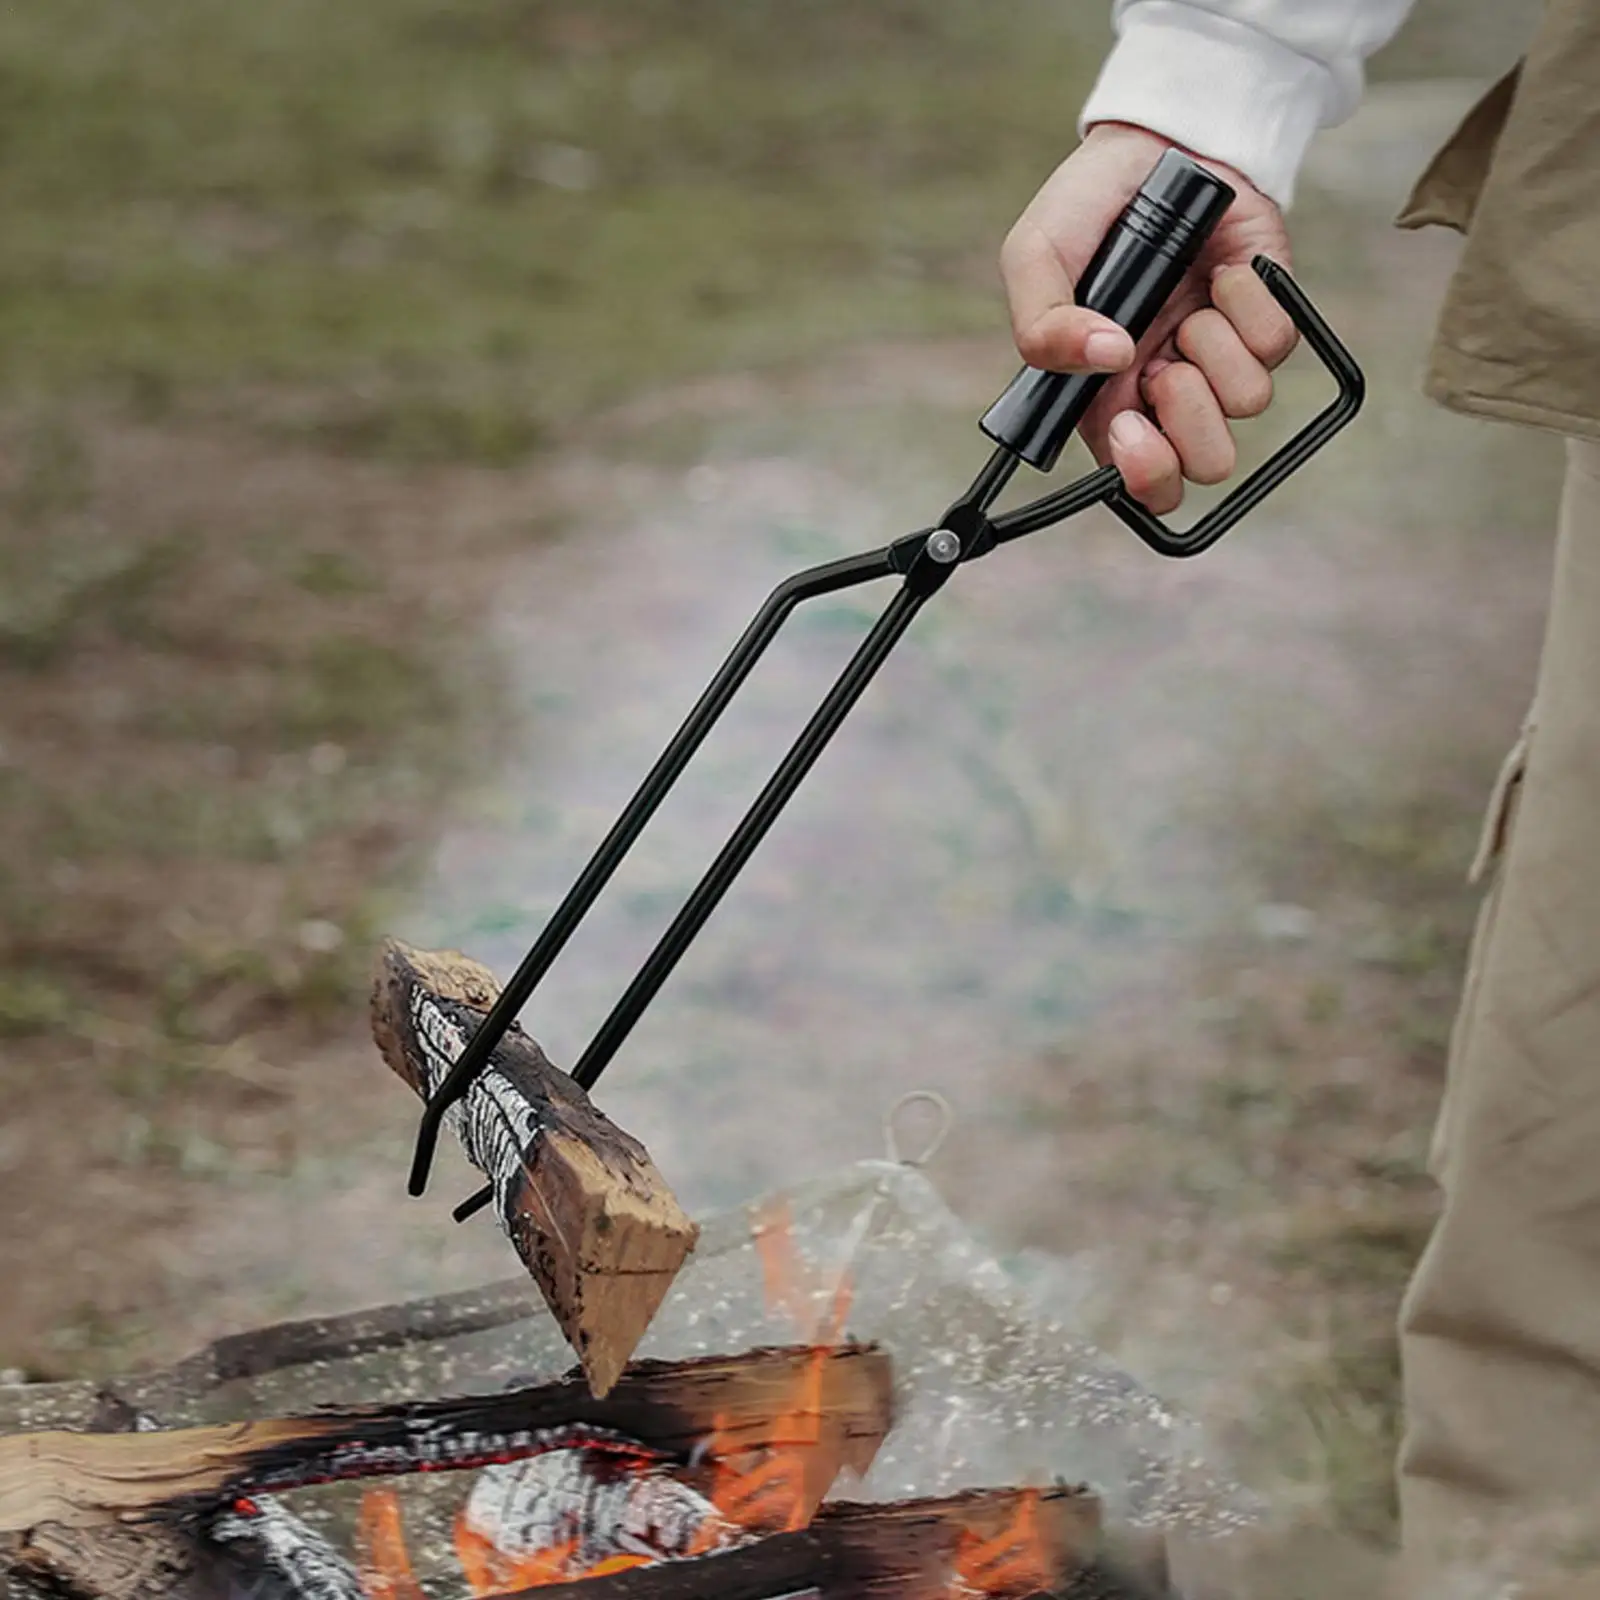 

Barbecue Carbon Clip Charcoal Fire Tongs Shears Cooking Tong Camping Bonfire BBQ Clip Wood Grabber BBQ Clamp Kitchen Tool